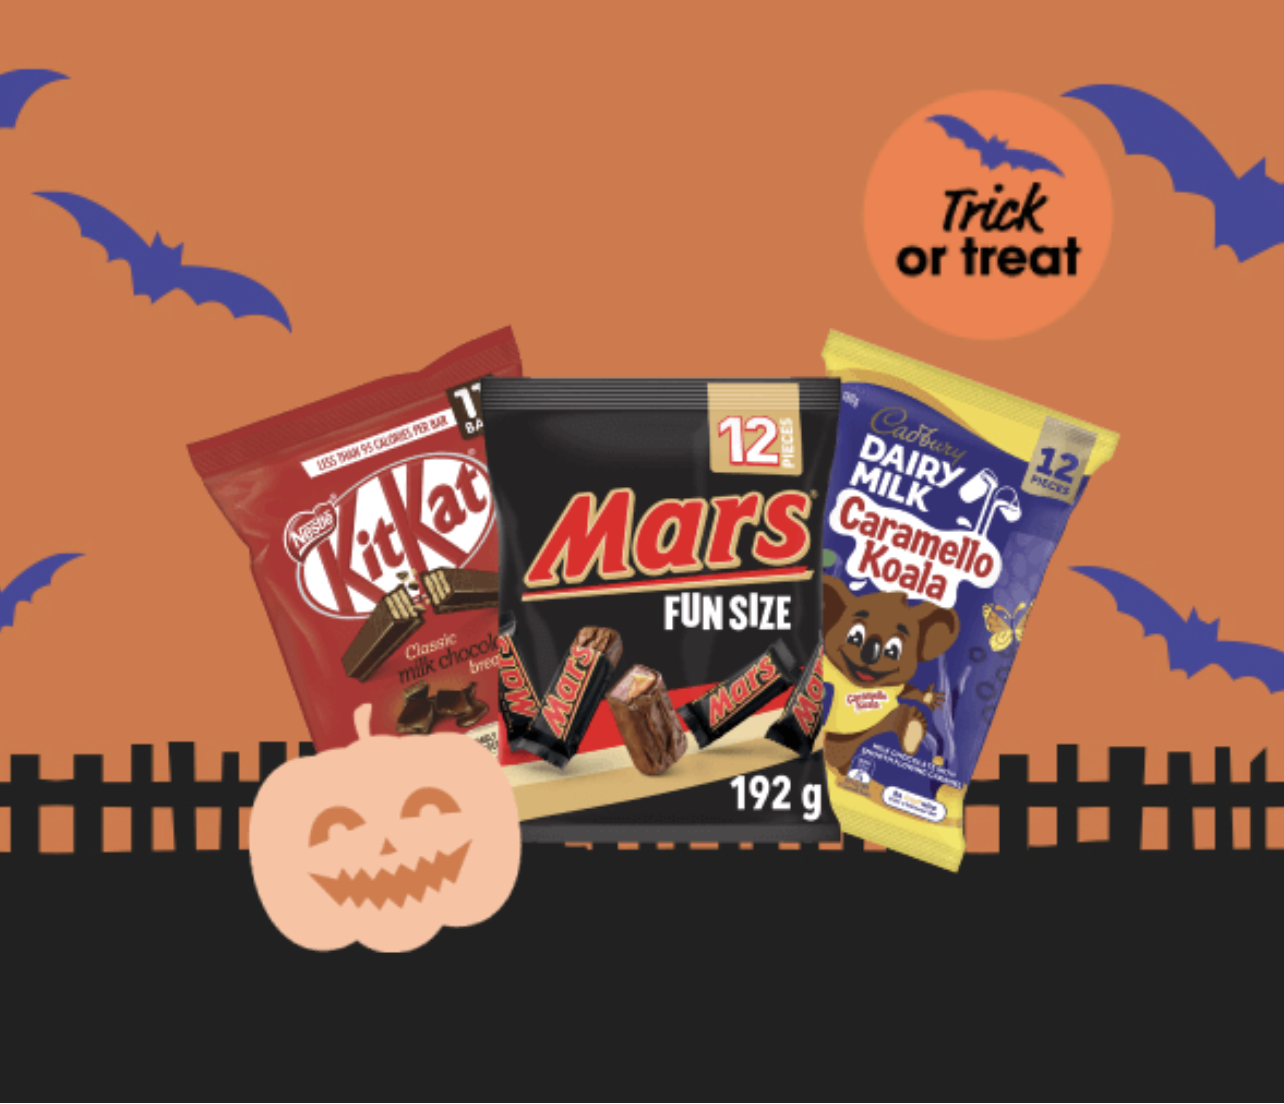 Sharepacks for Trick or Treaters